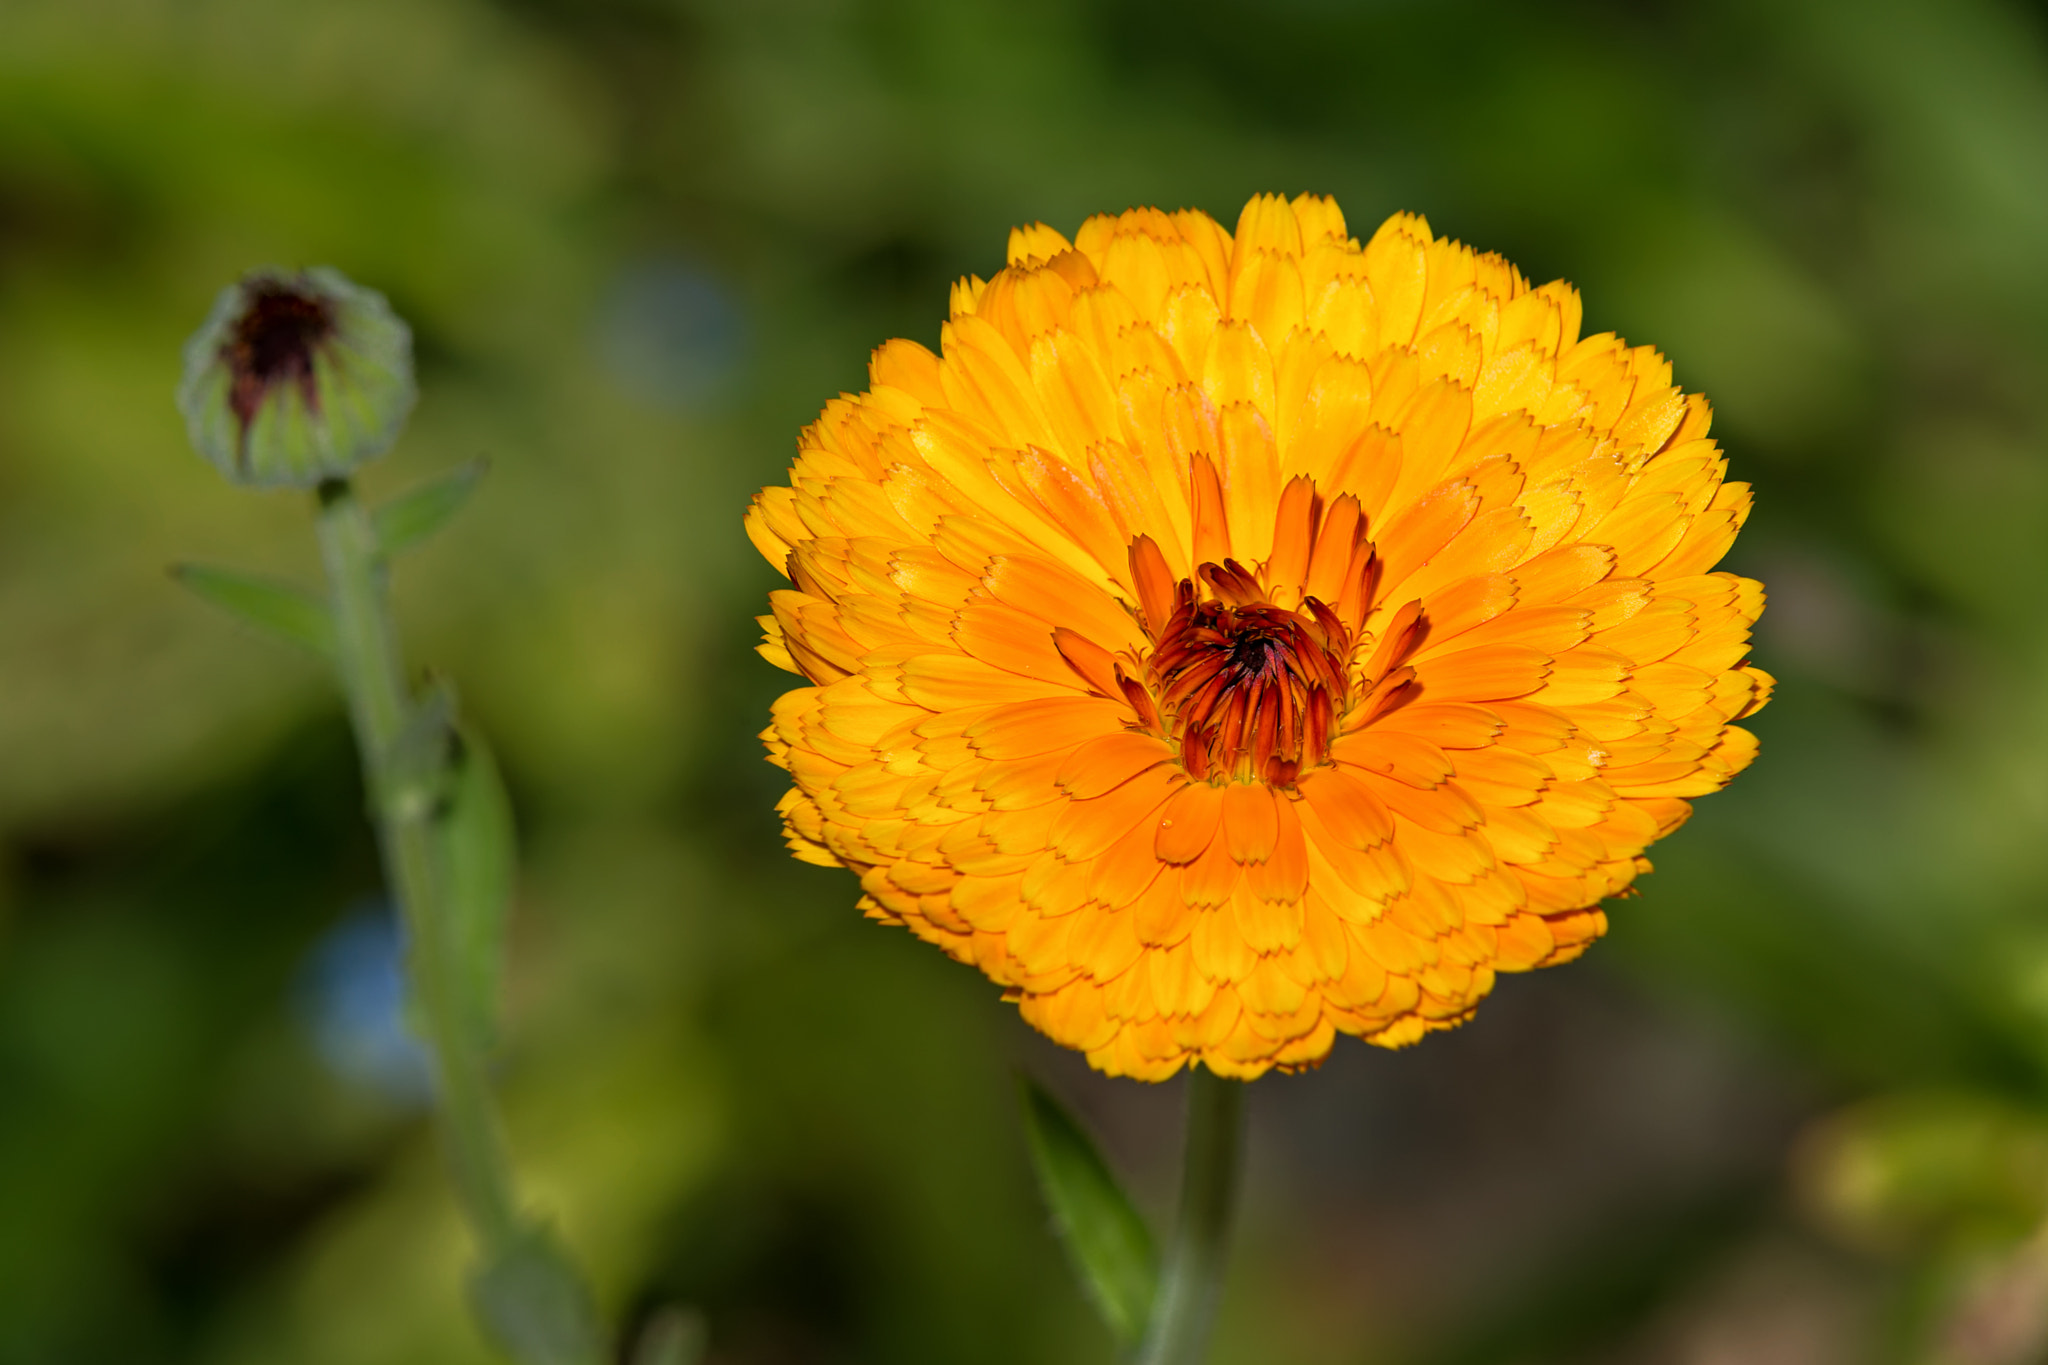 Sony a99 II sample photo. Golden flower photography